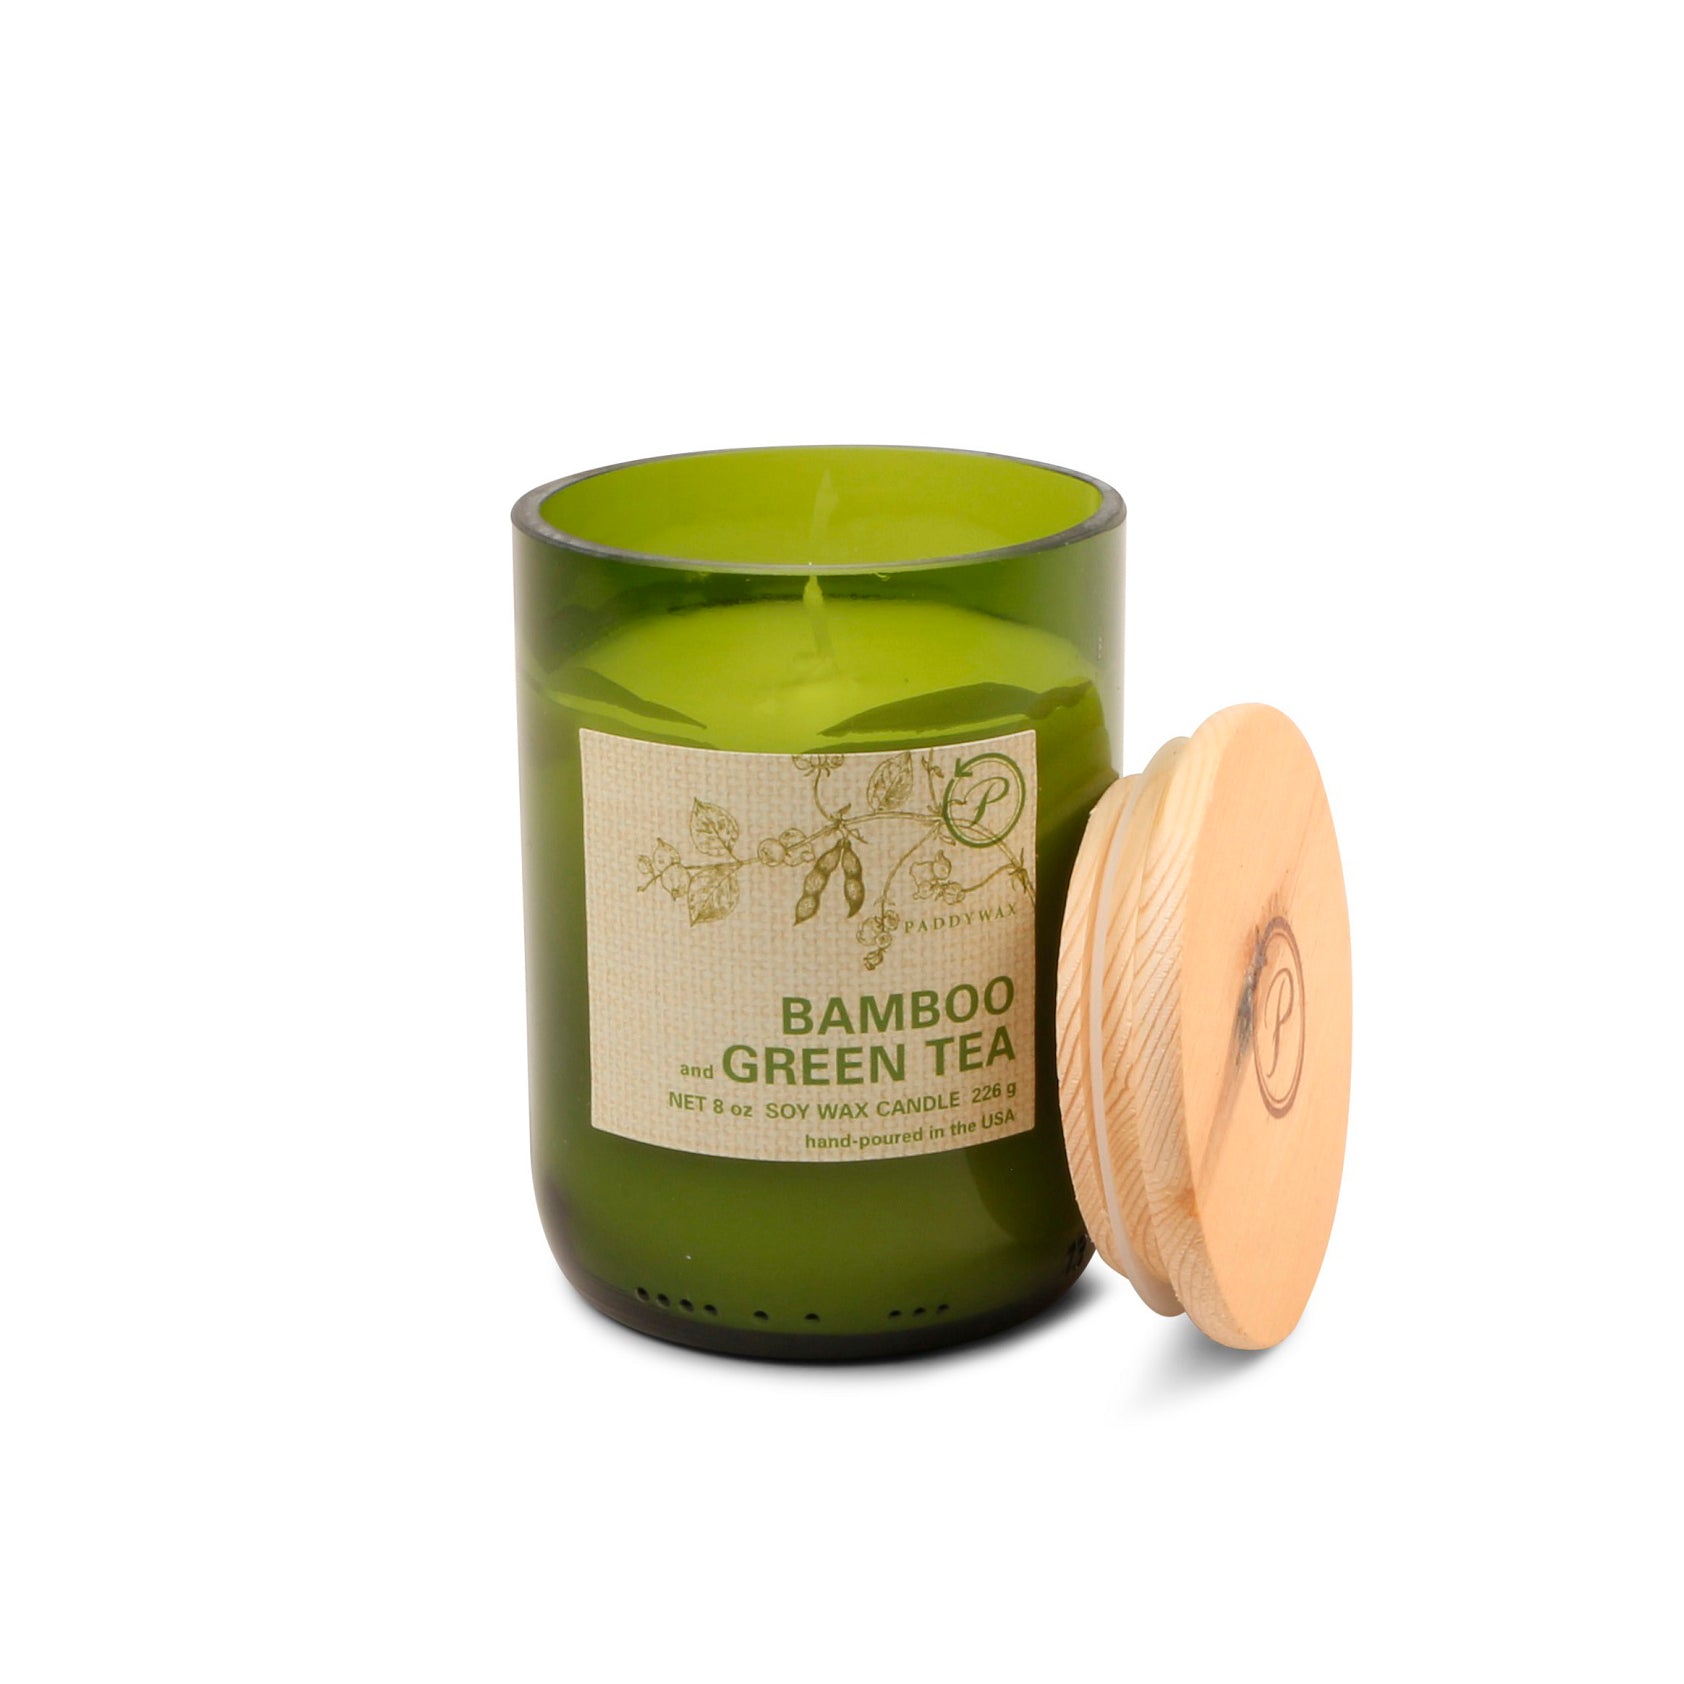 Paddy Wax Eco Green Recycled Glass Candle (226g) - Bamboo & Green Tea